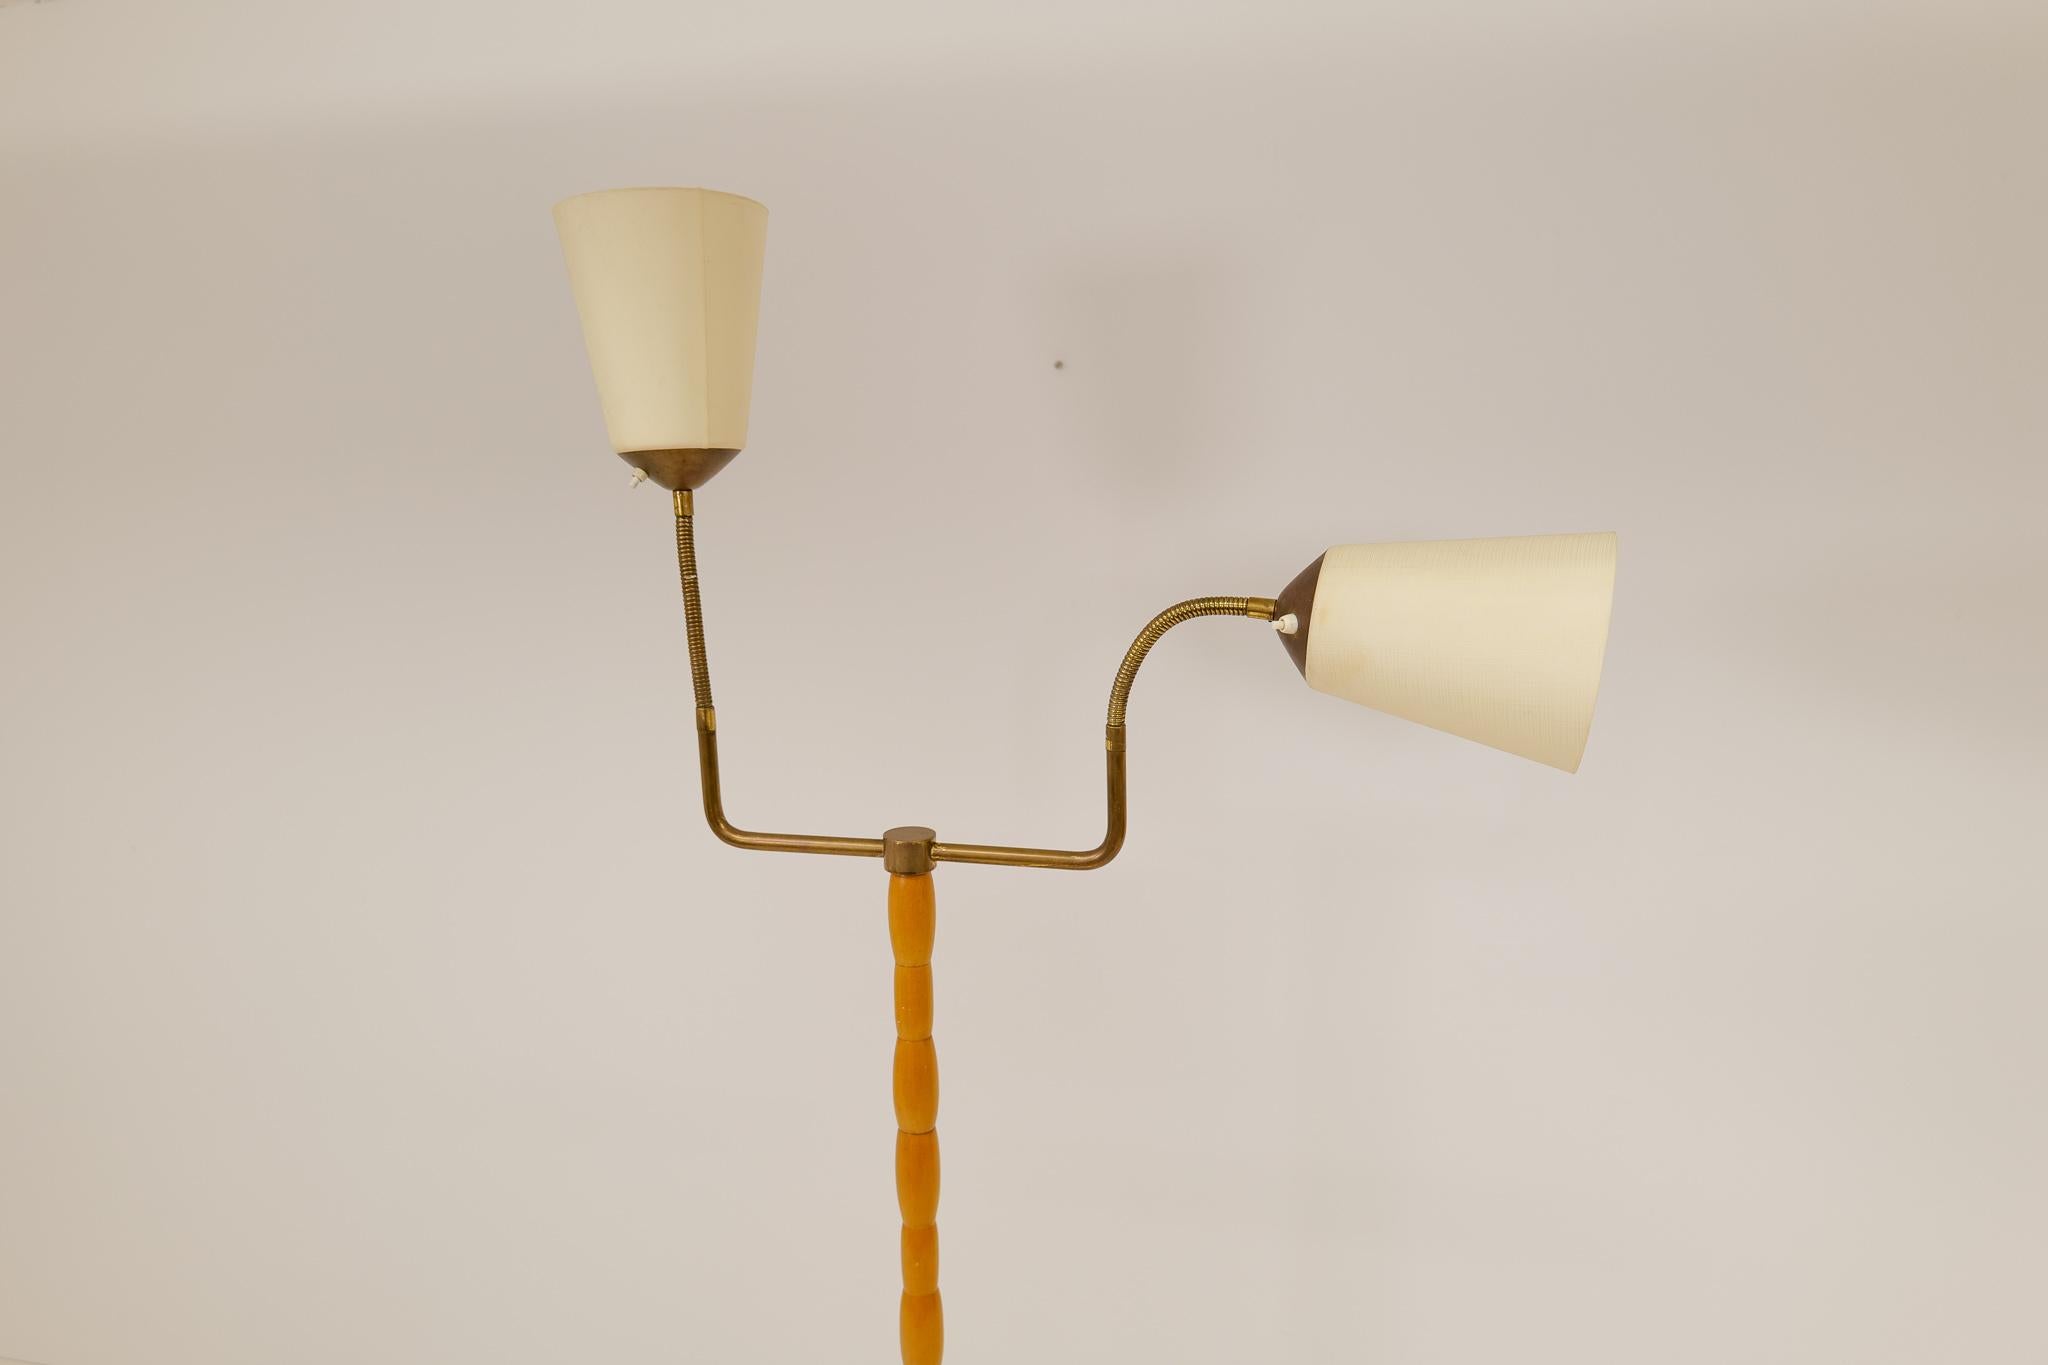 Midcentury Organic Floor Lamp in Birch and Brass Sweden, 1950s In Good Condition For Sale In Hillringsberg, SE